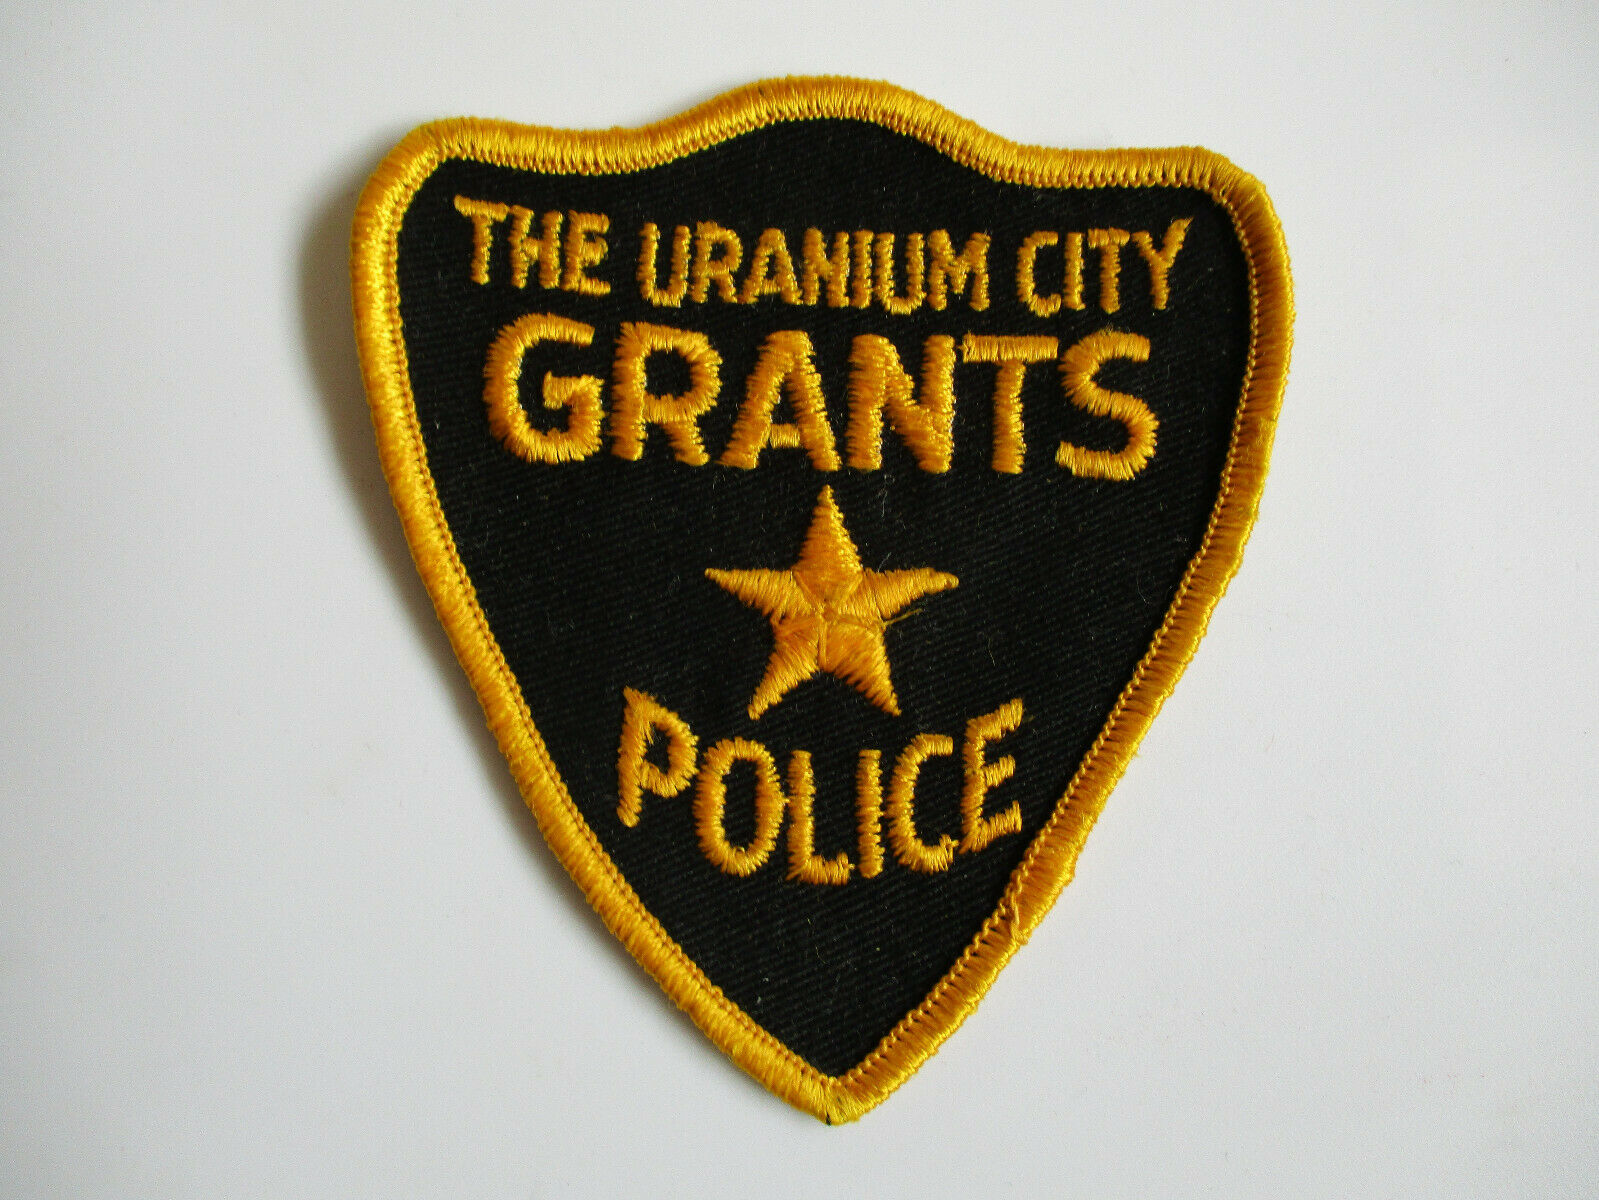 Vintage 1970s Old Grants New Mexico The Uranium City Police Patch